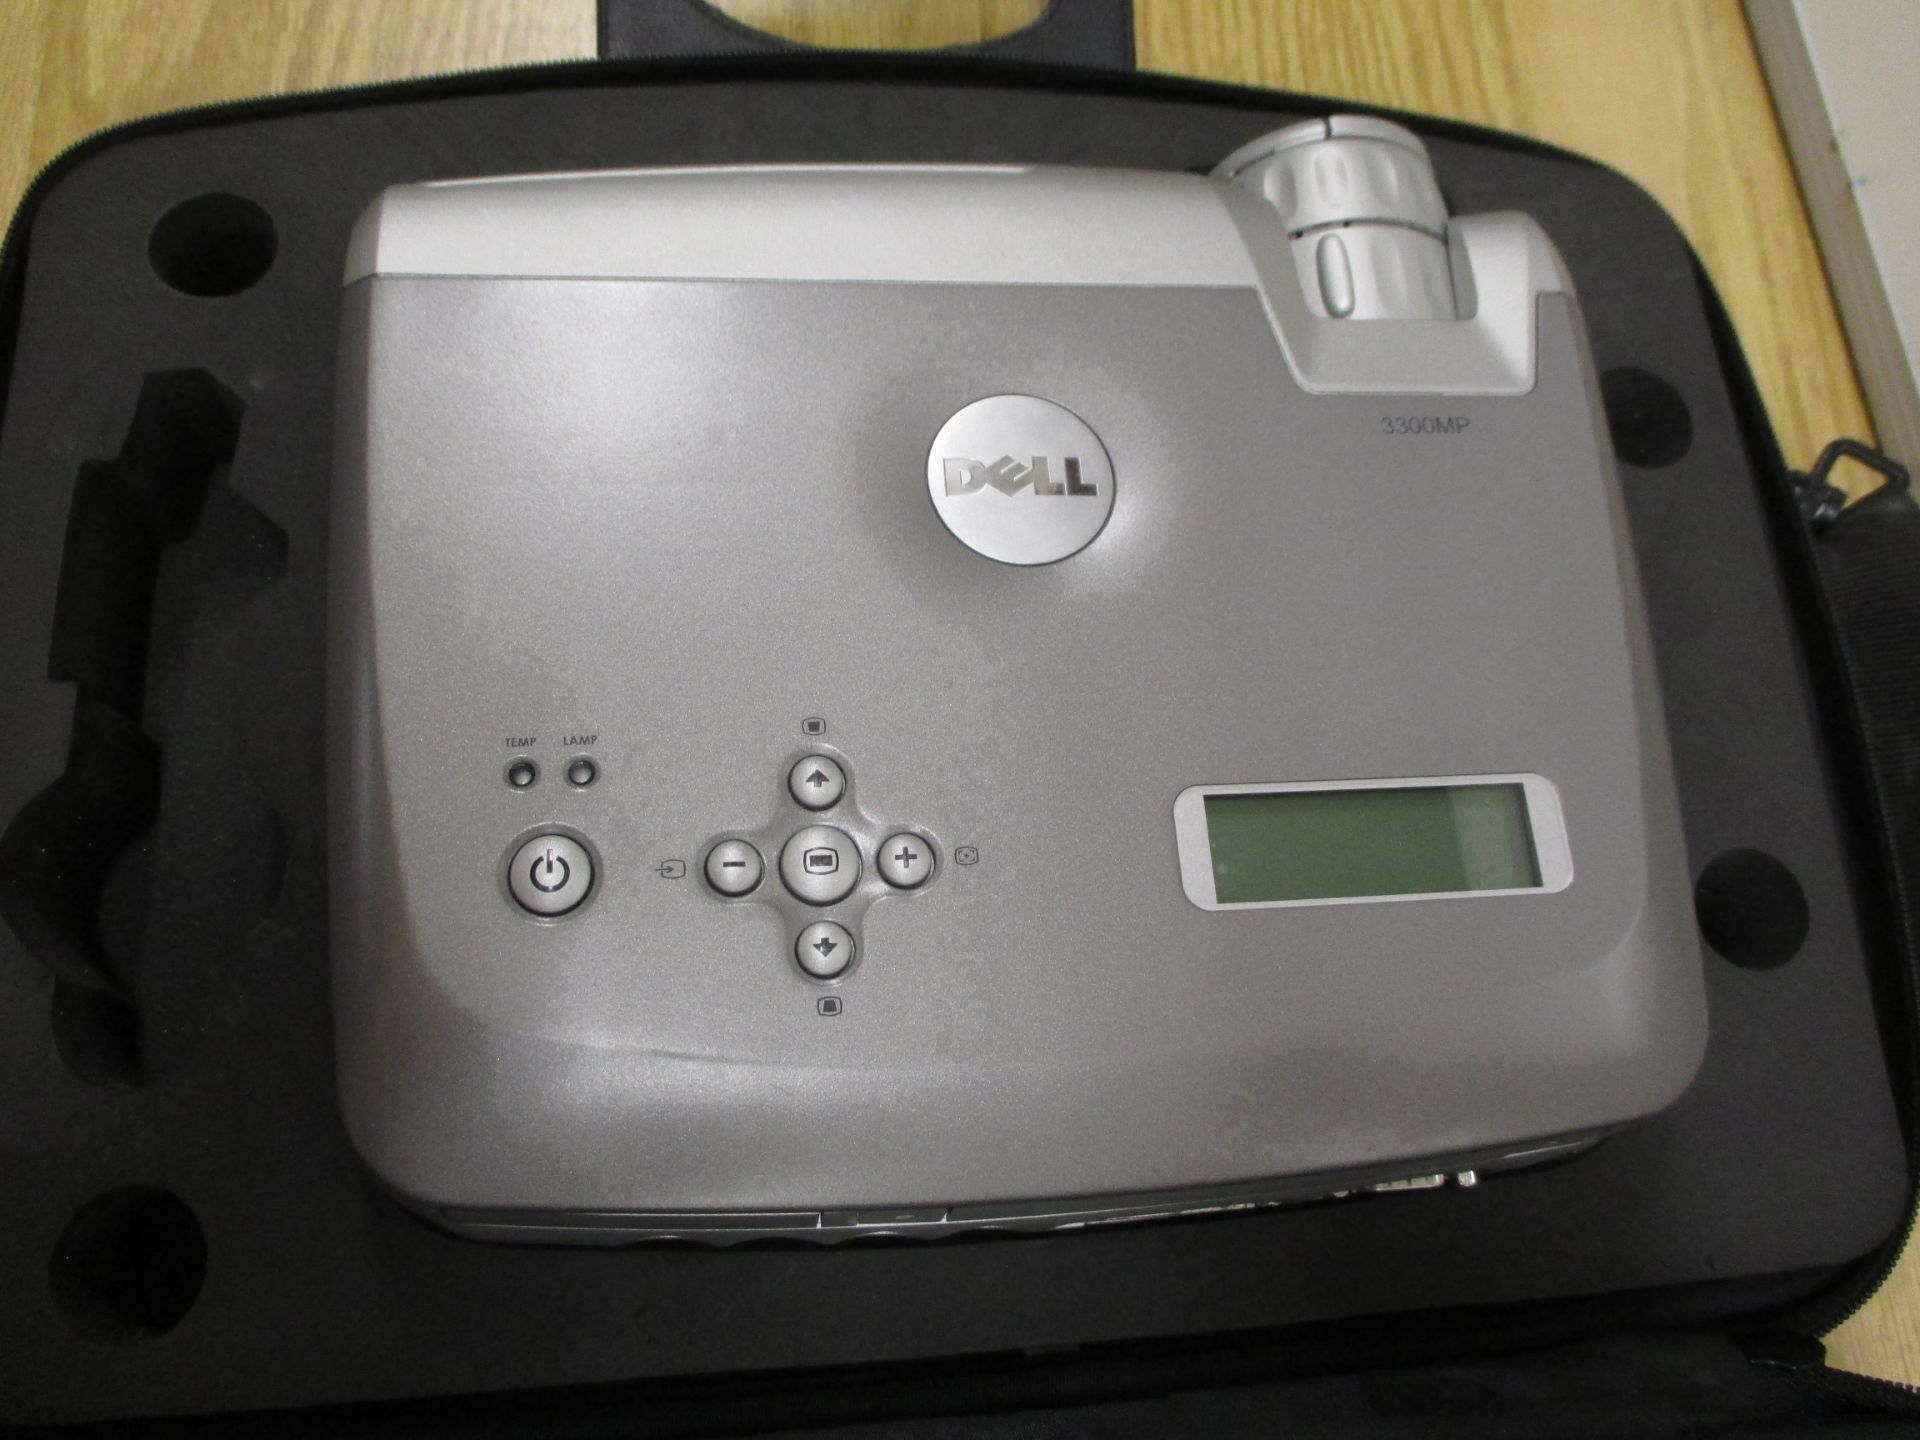 Dell 3300MP PROJECTOR SHOWING 633 LAMP HOURS. IN ORIGINAL FITTED CASE WITH OWNERS MANUAL, REMOTE - Bild 2 aus 4